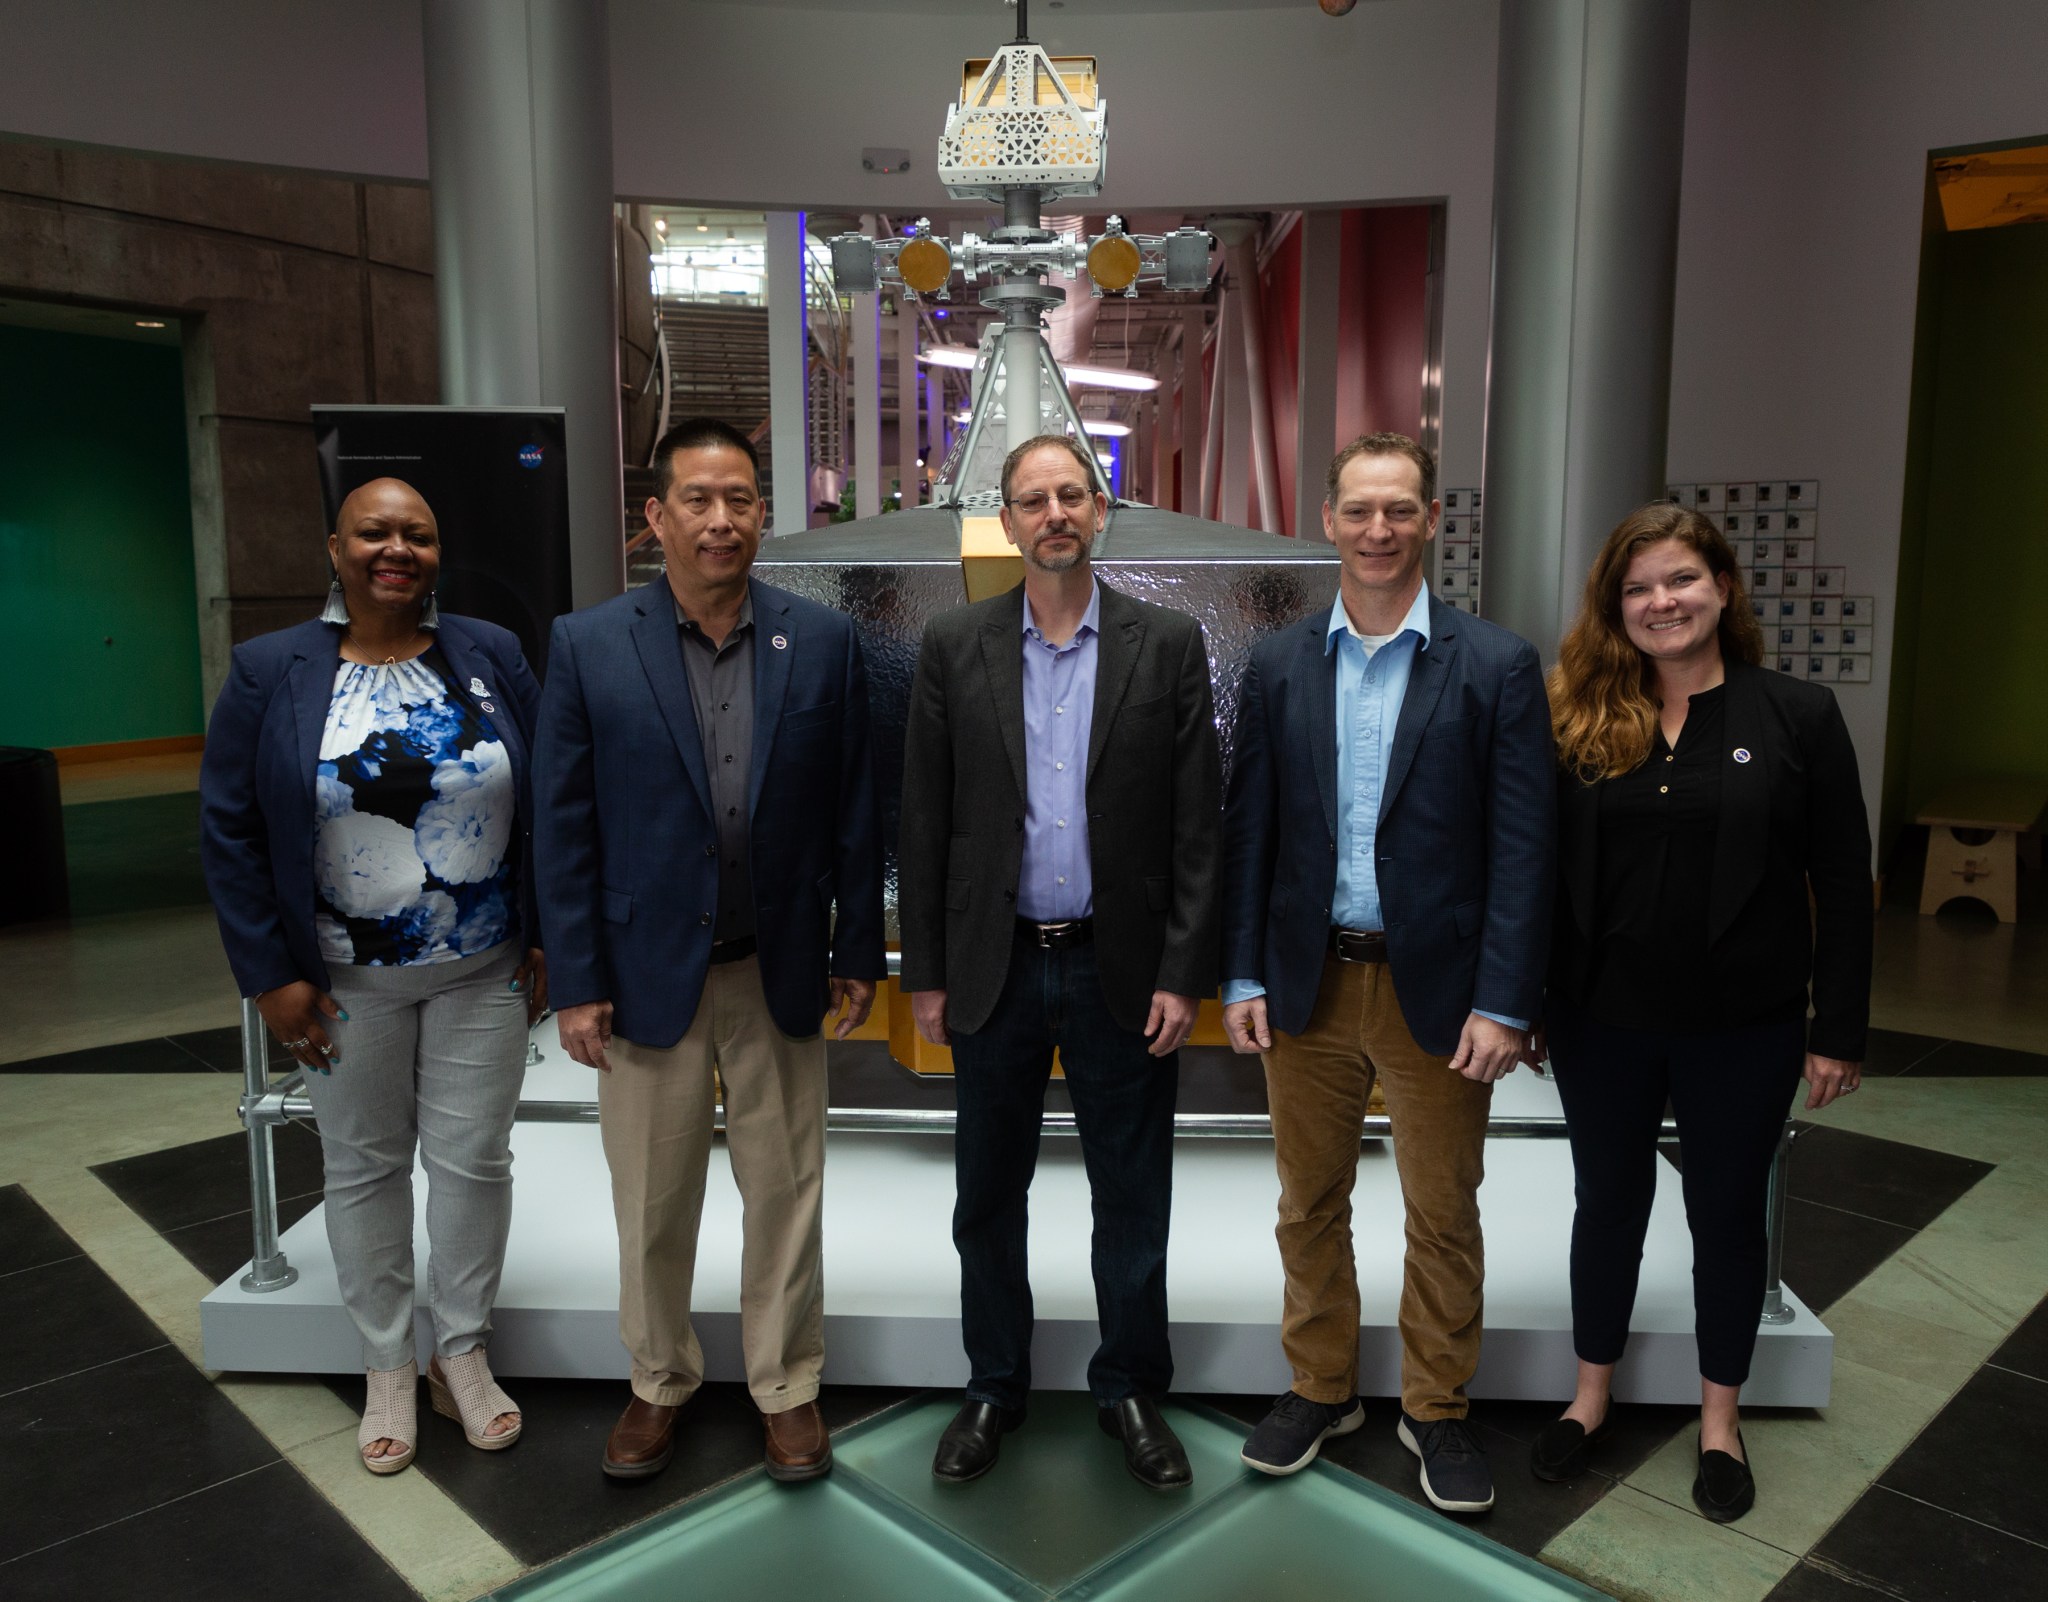 Joeletta Patrick, Director of NASA's California Office of STEM Engagement, Eugene Tu, Ames Center Director, Adam Tobin, Chabot Director, Ryan Vaughan, lead mission systems engineer, Cara Dodge, Ames Event Lead, in front of VIPER model.